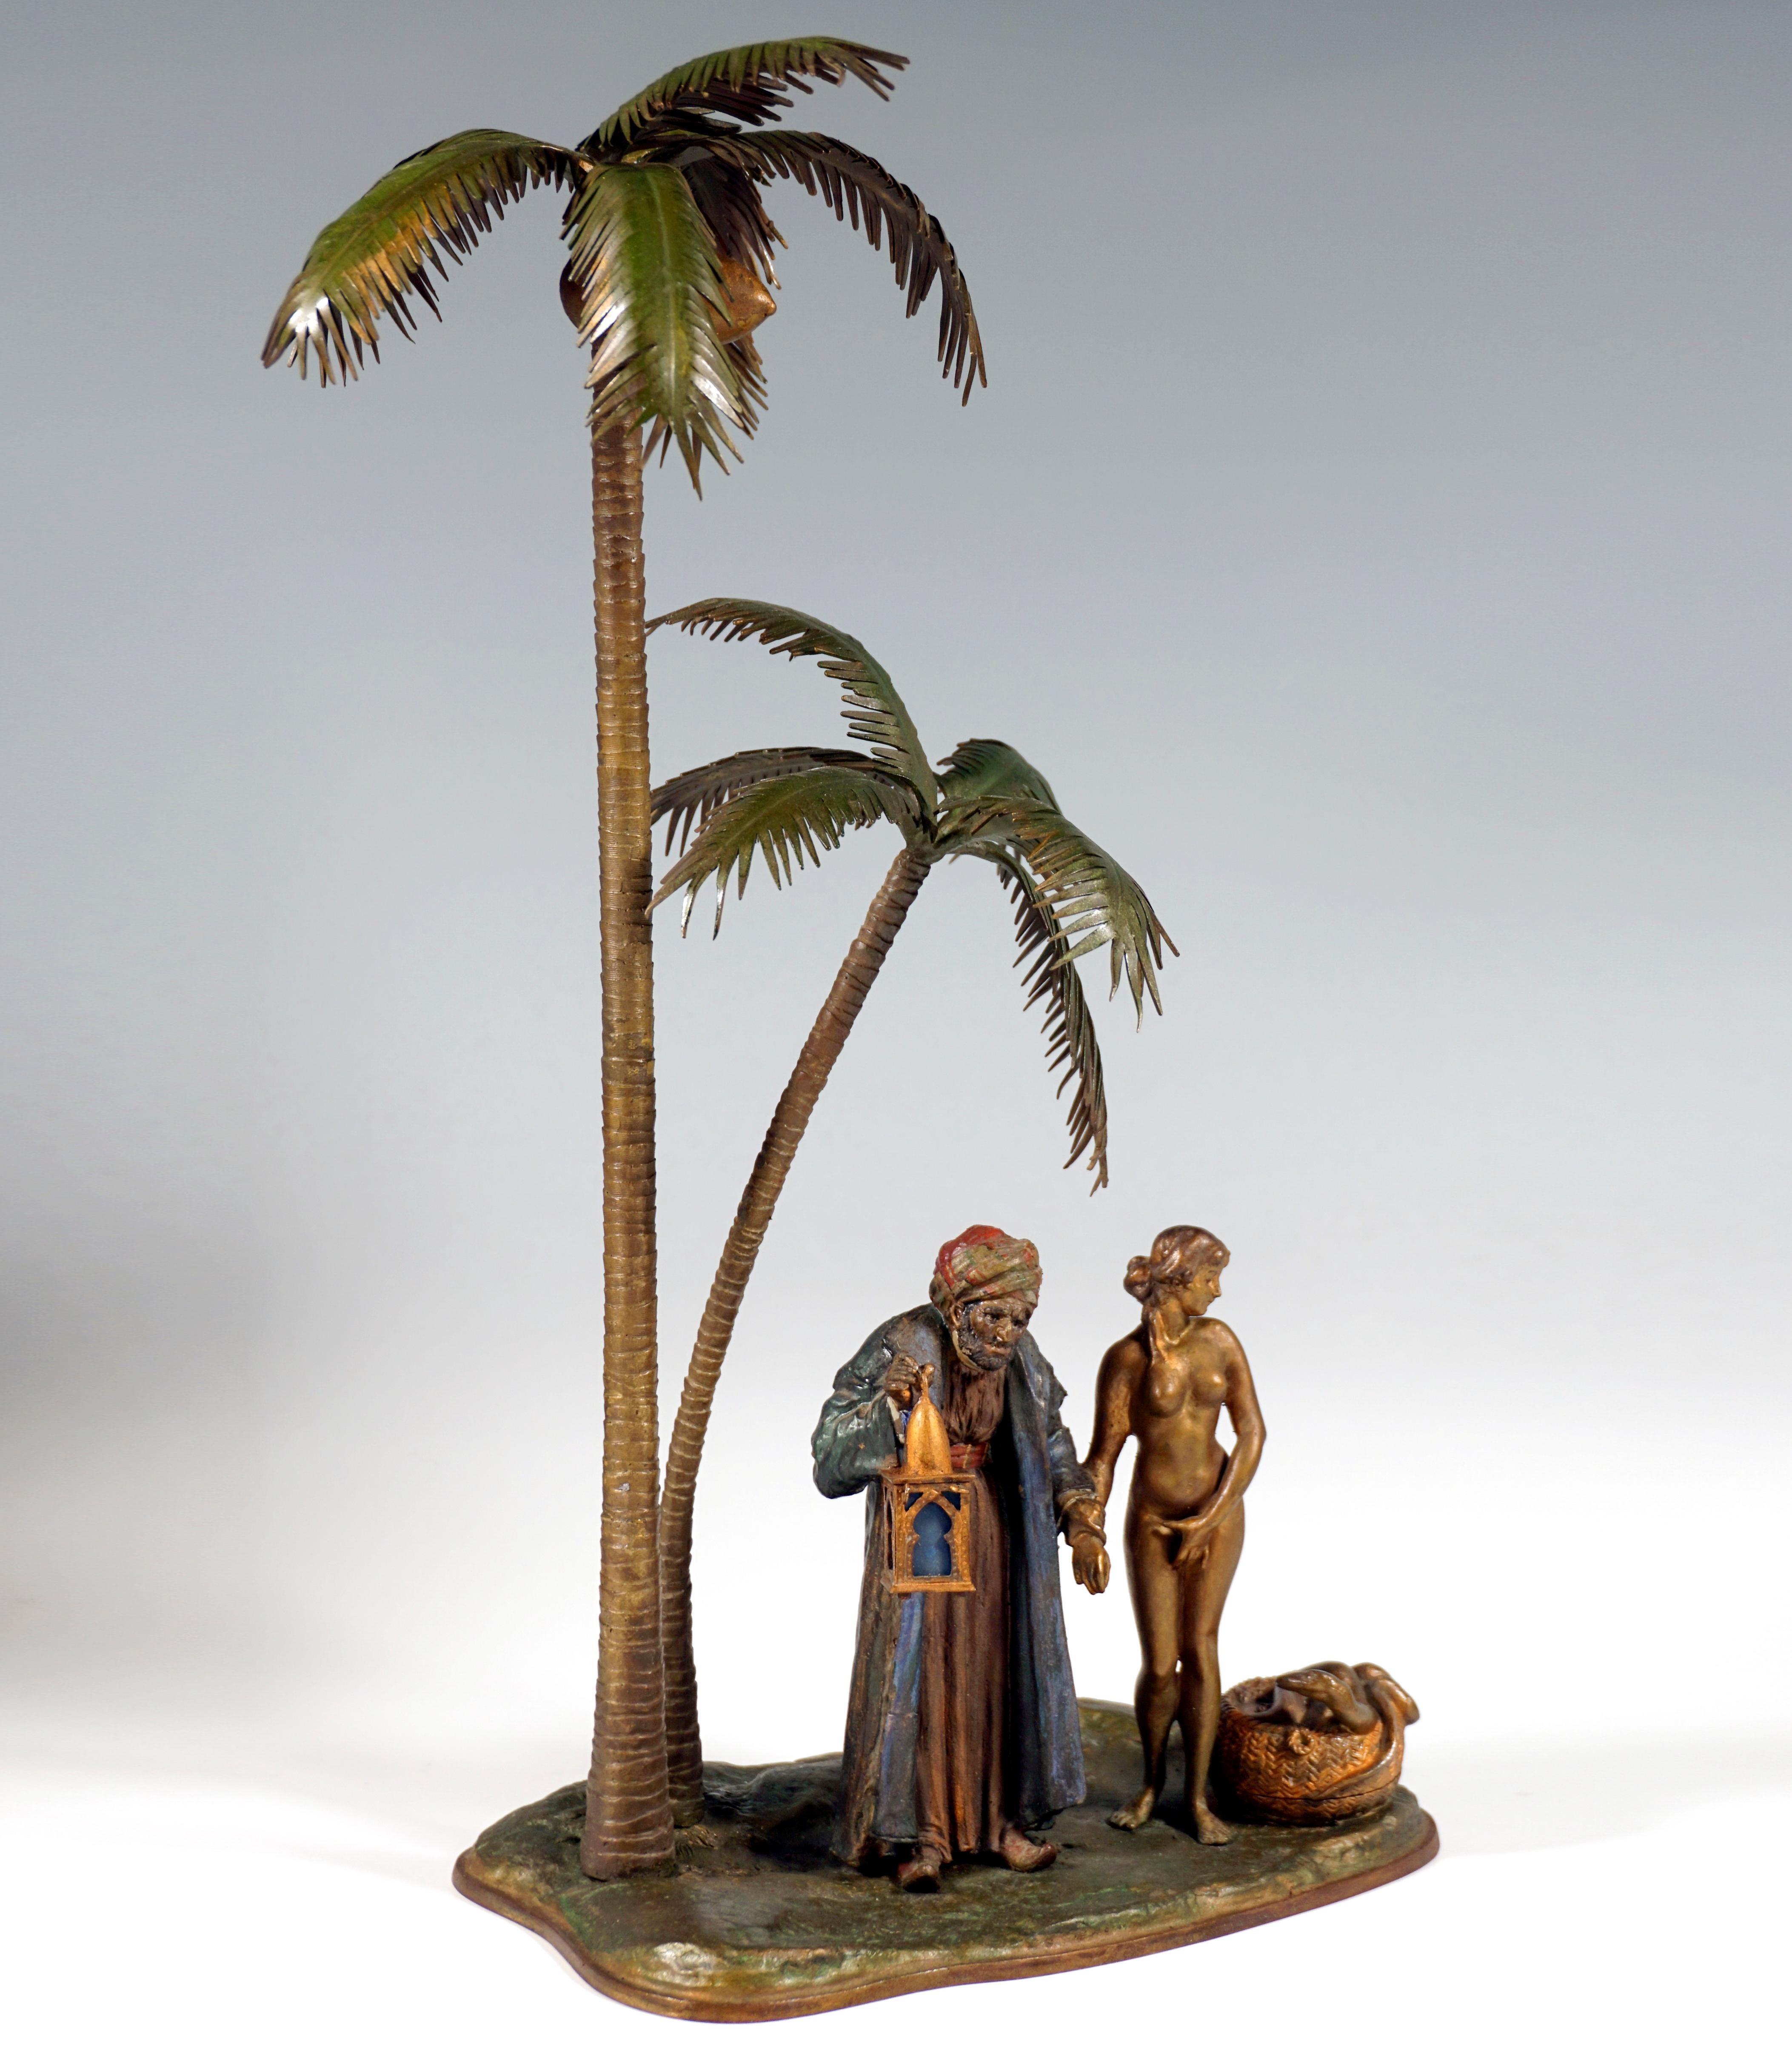 Excellent Piece of Viennese Bronze Art:
Elaborately detailed bronze sculpture of a slave trader with a girl under palm trees:
Old oriental man in a long coat and turban in a stooped posture holding a lantern high with one hand, grasping the wrist of